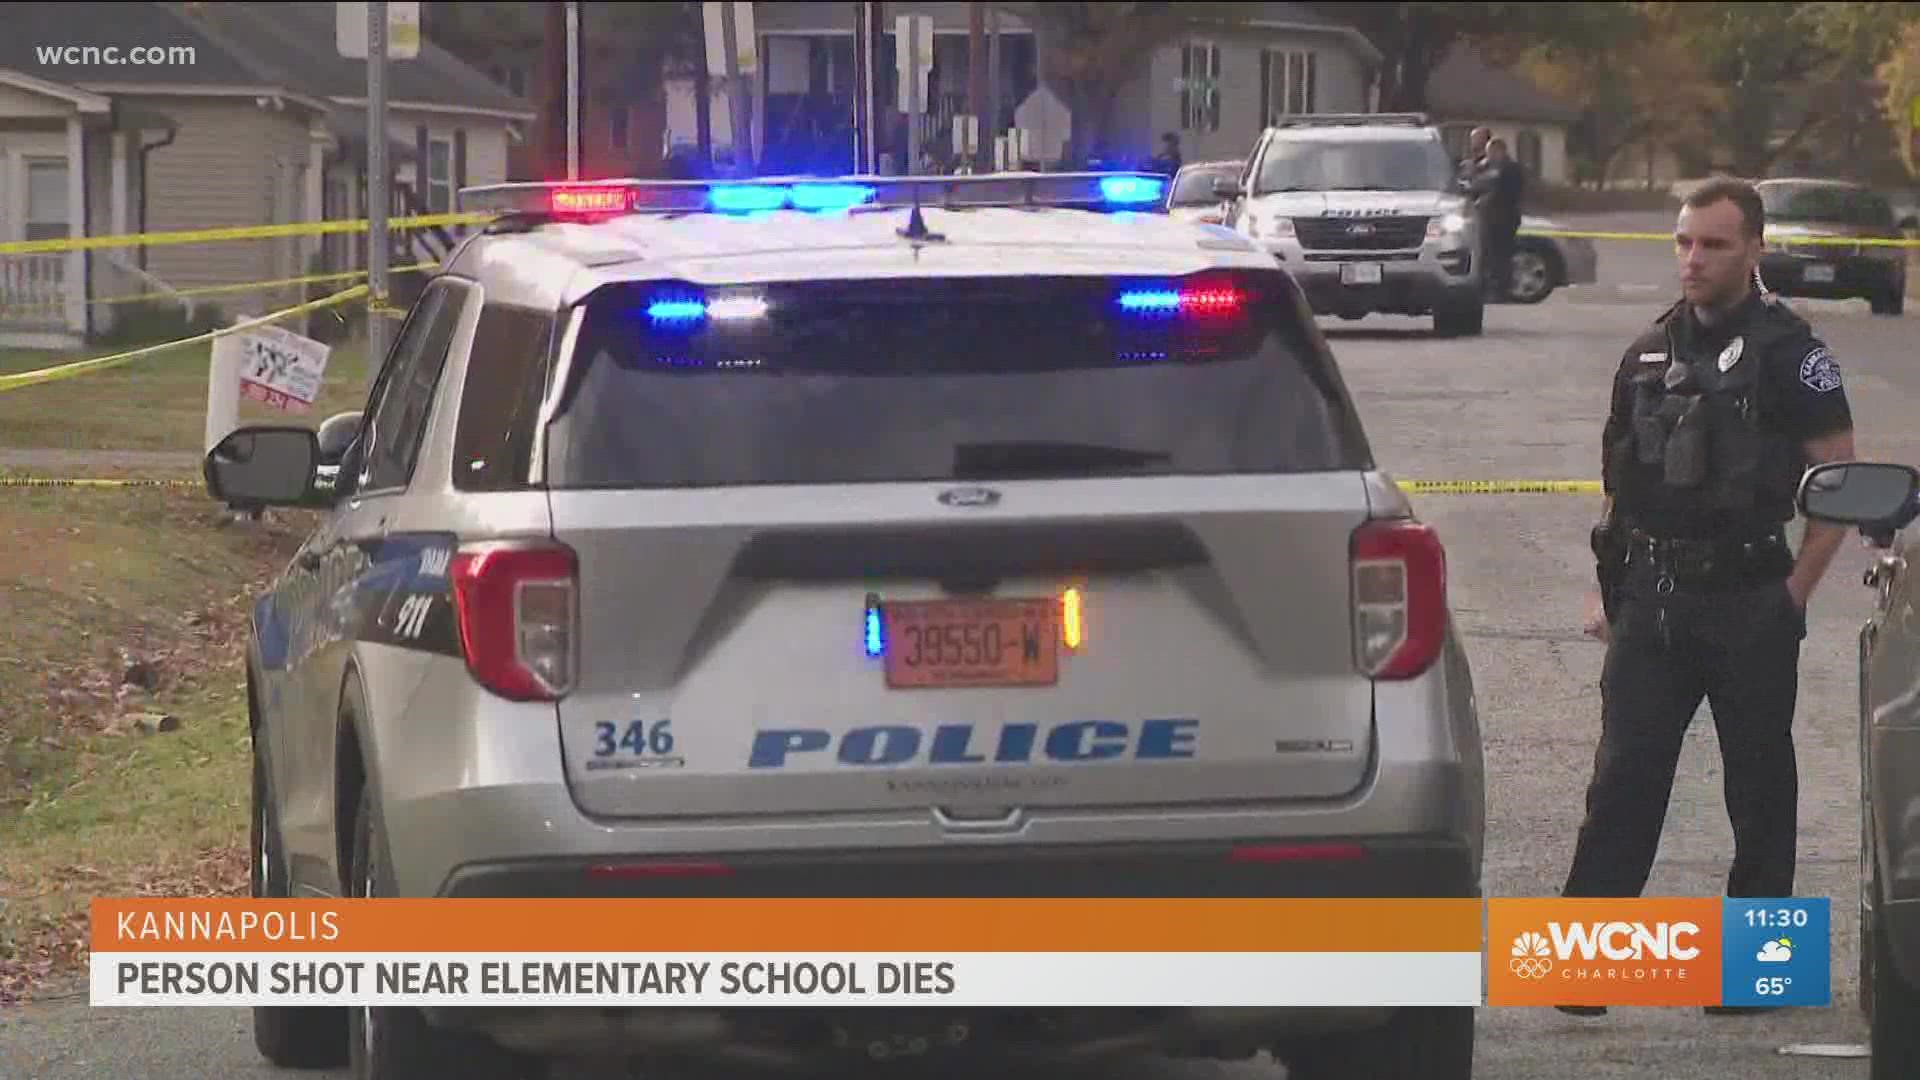 A 17-year-old died after being shot near G.W. Carver Elementary School in Kannapolis. No arrests have been made.